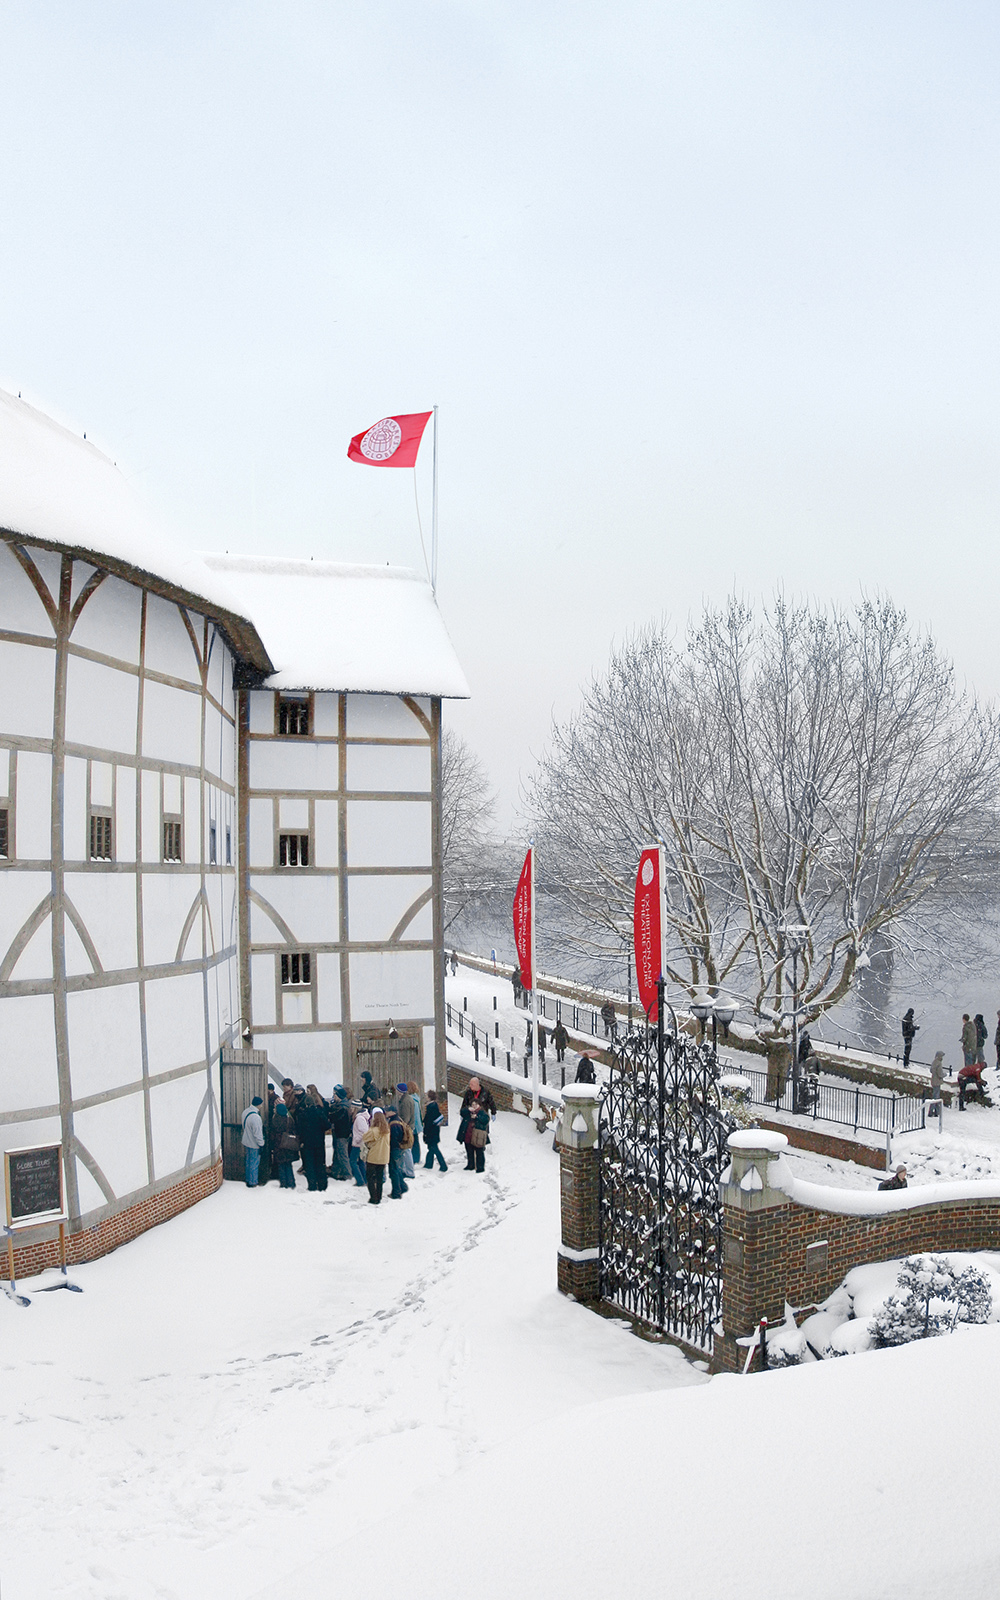 A snowy view of the white circular timber structure theatre, with the bank of the River Thames infront